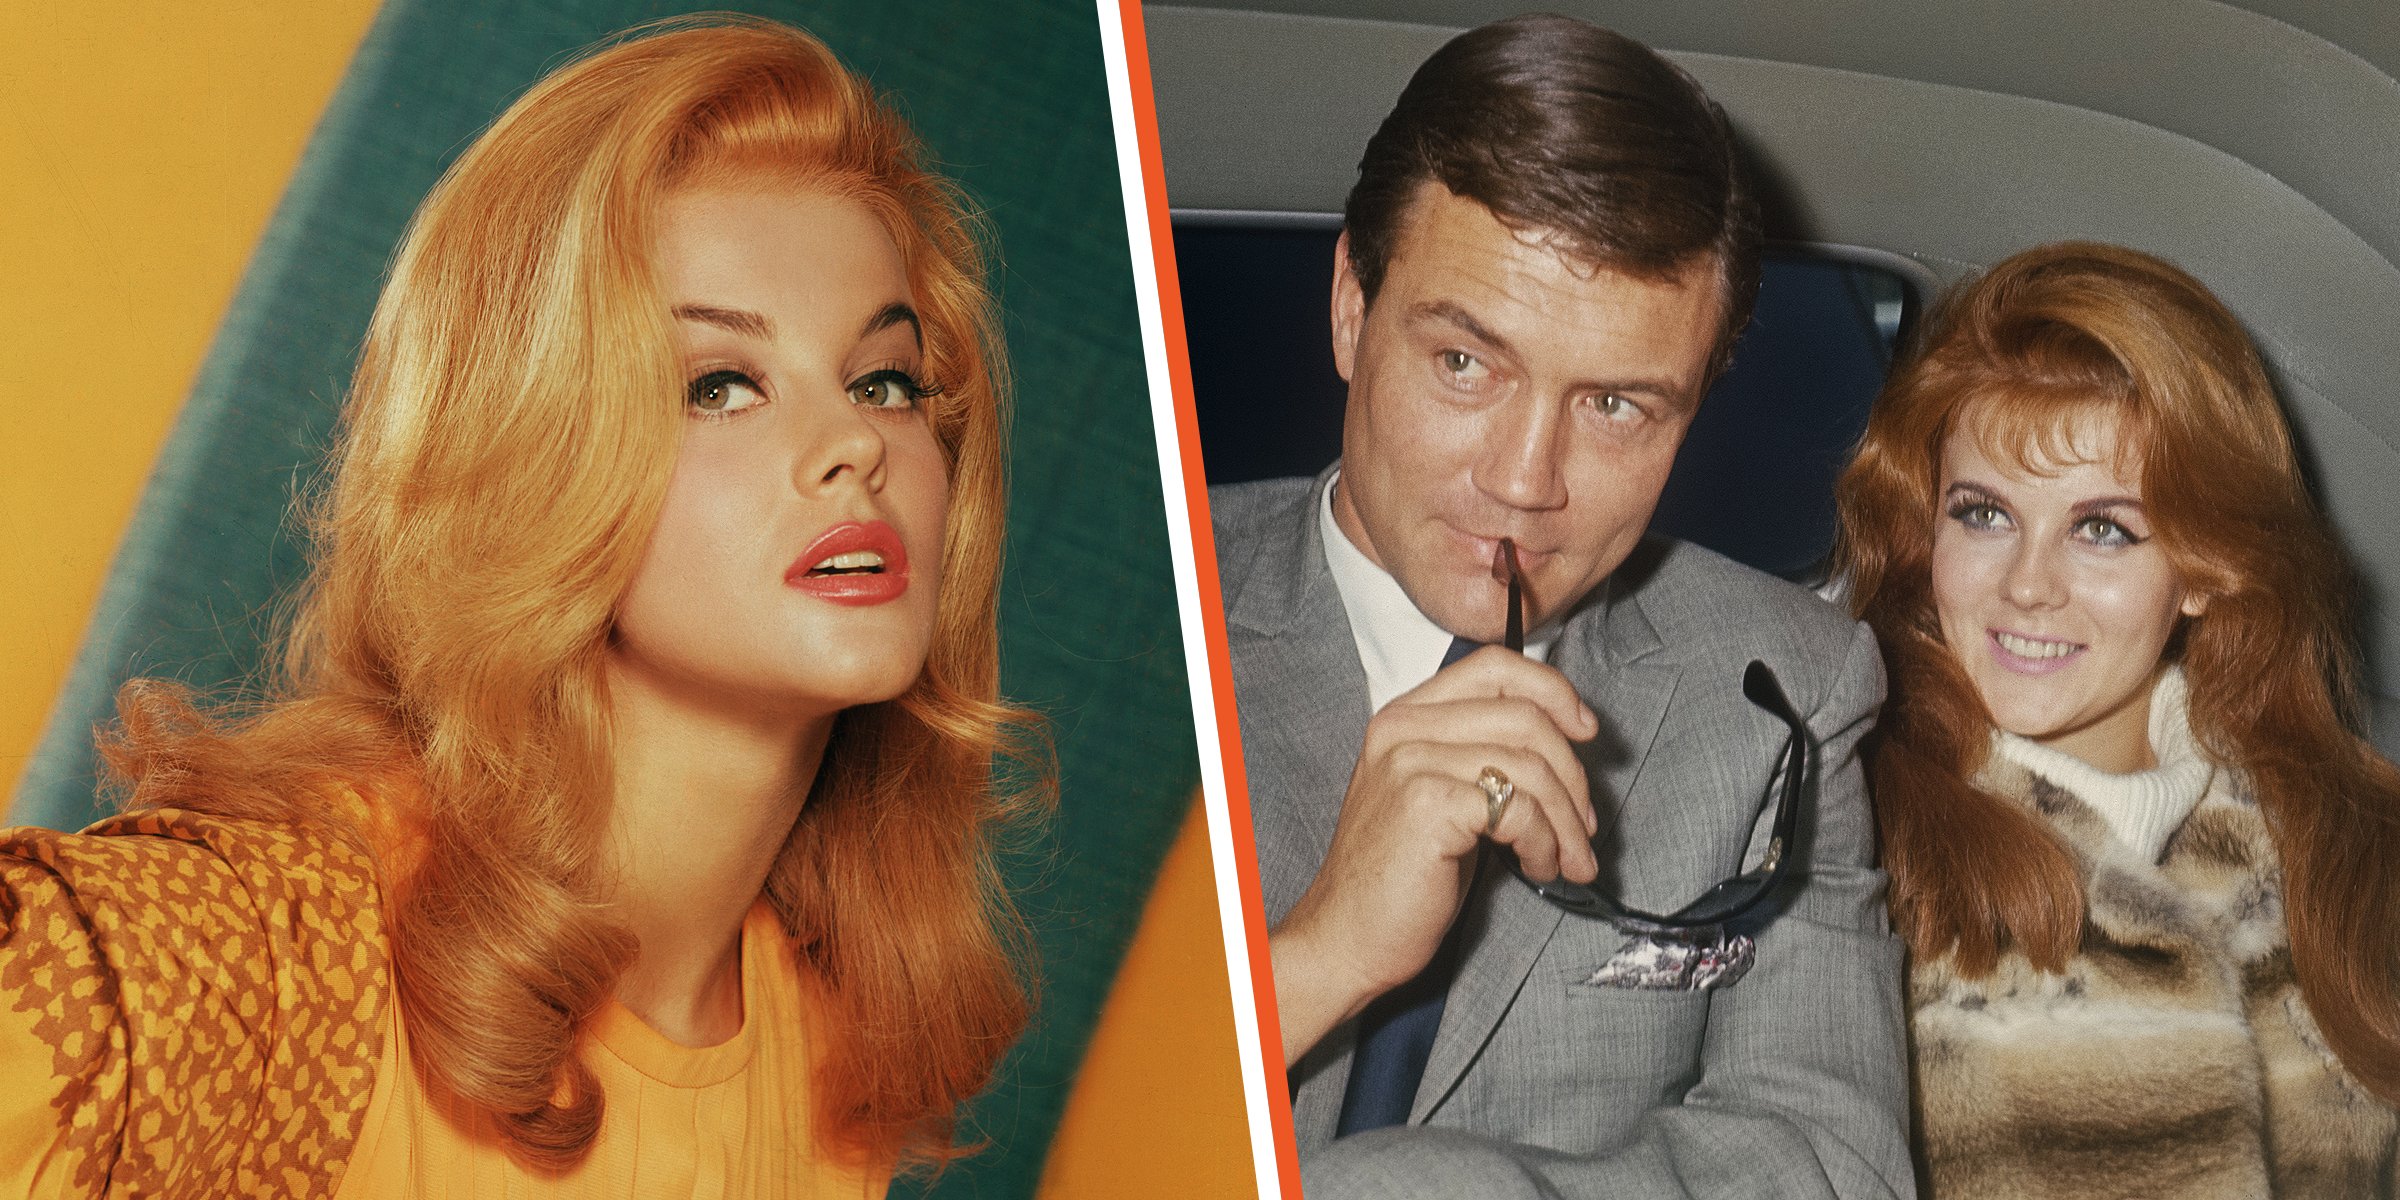 Ann-Margret | Roger Smith and Ann-Margret | Source: Getty Images